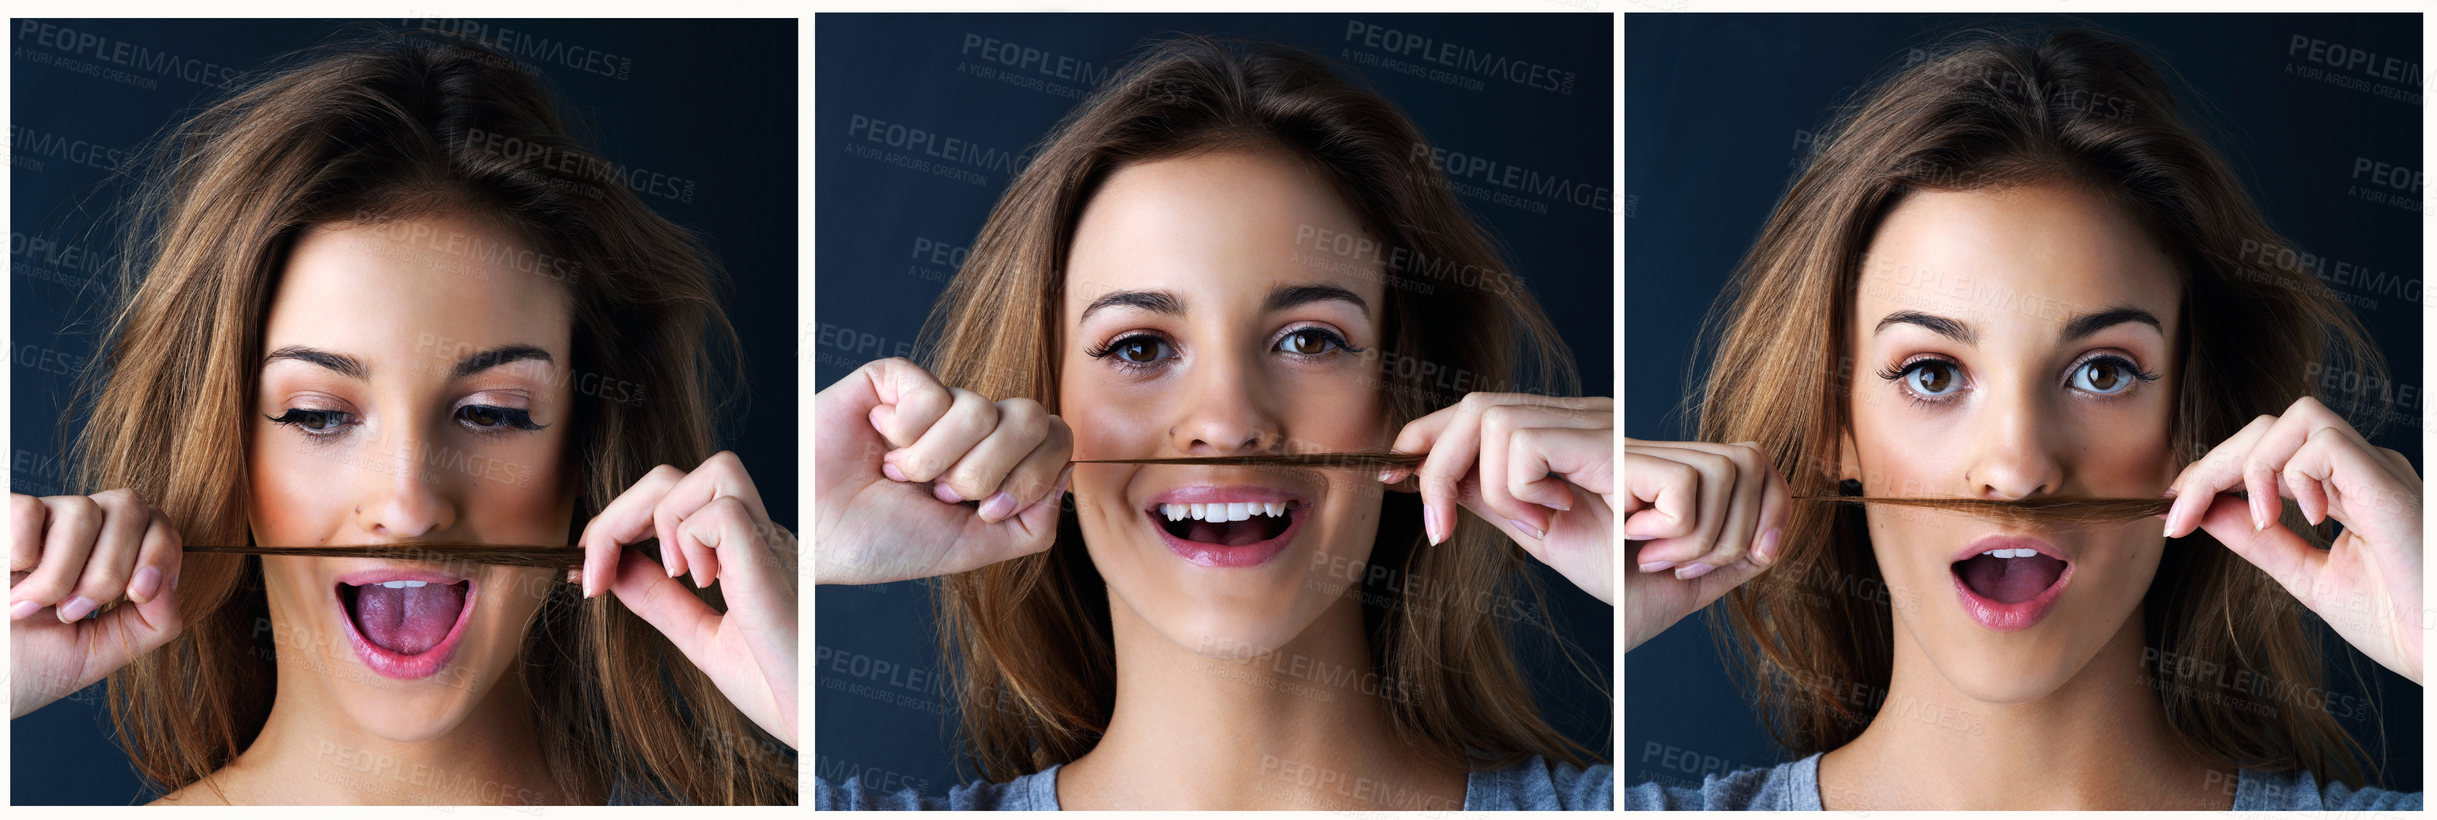 Buy stock photo Multiple image shot of a cute teenage girl making a mustache with her hair against a dark background